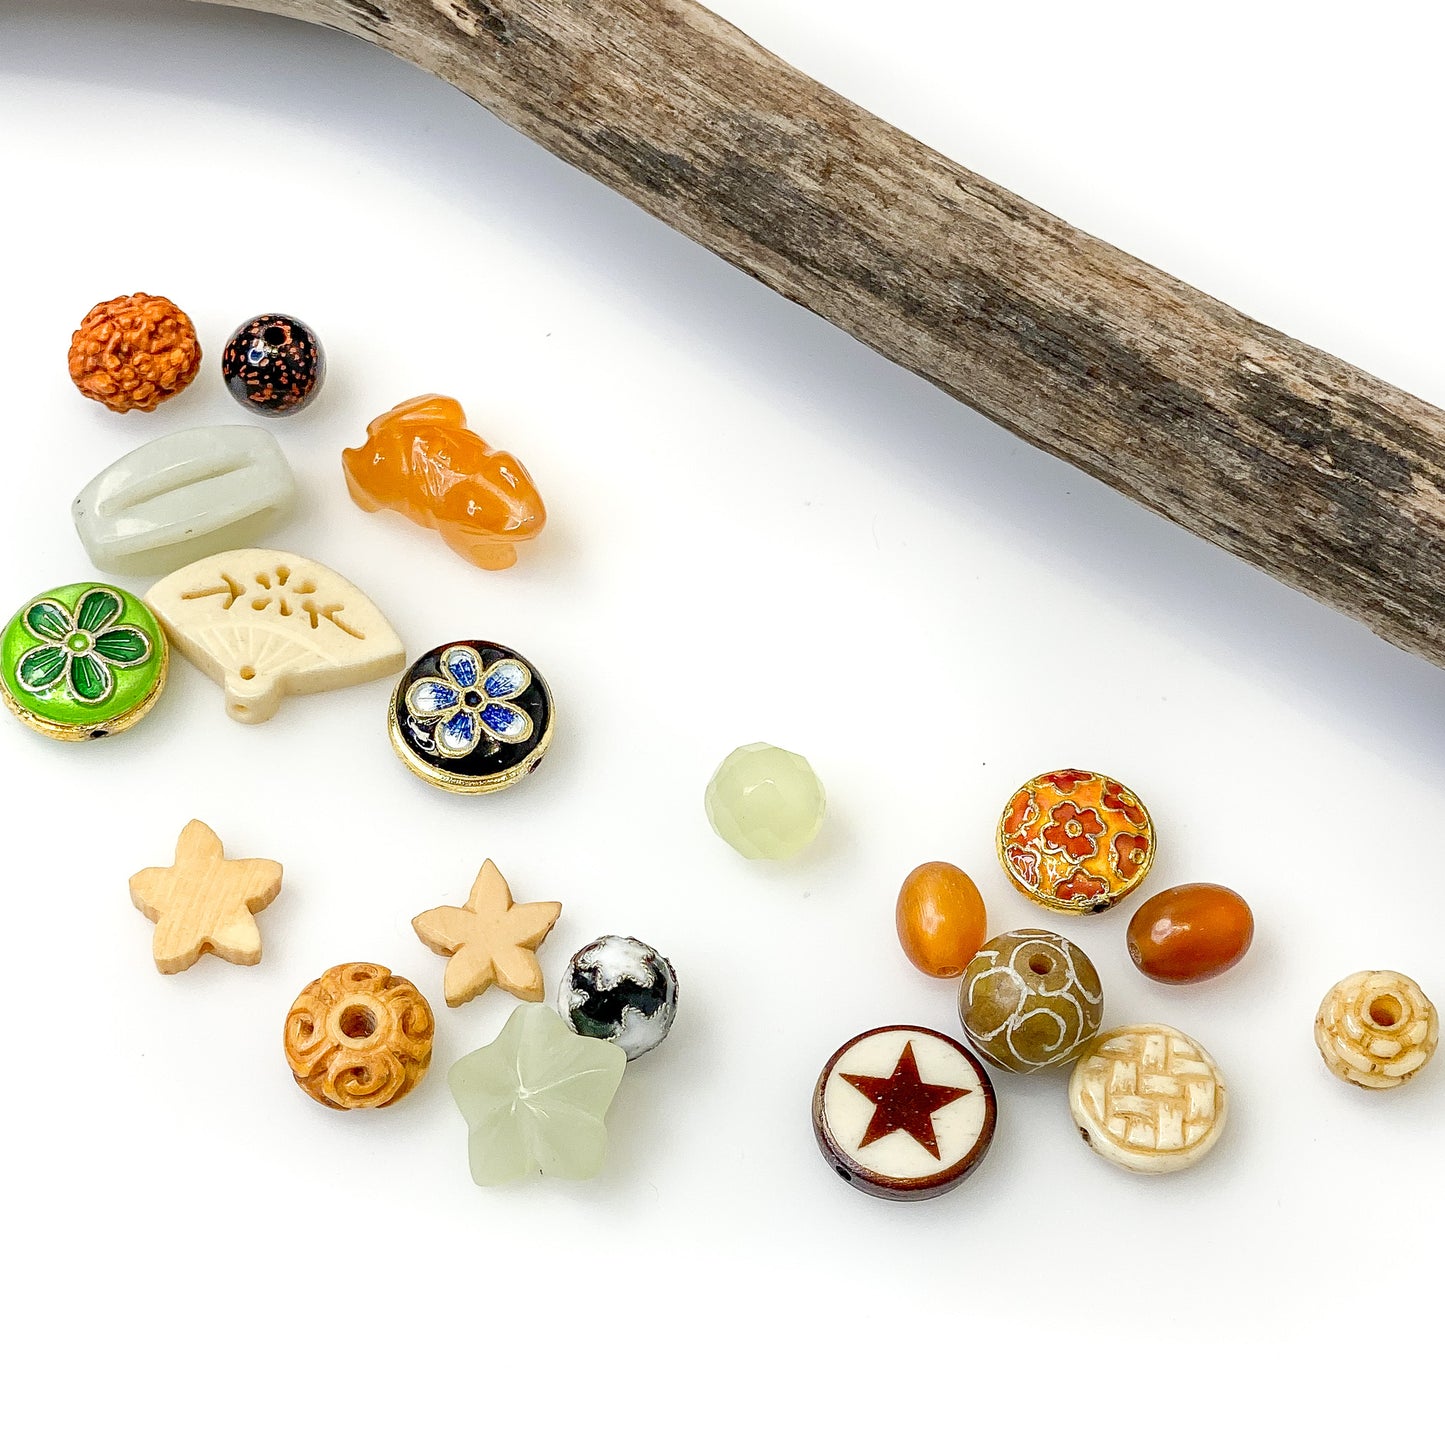 Luck and Good Fortune Necklace Bead Mix - 20 pcs.